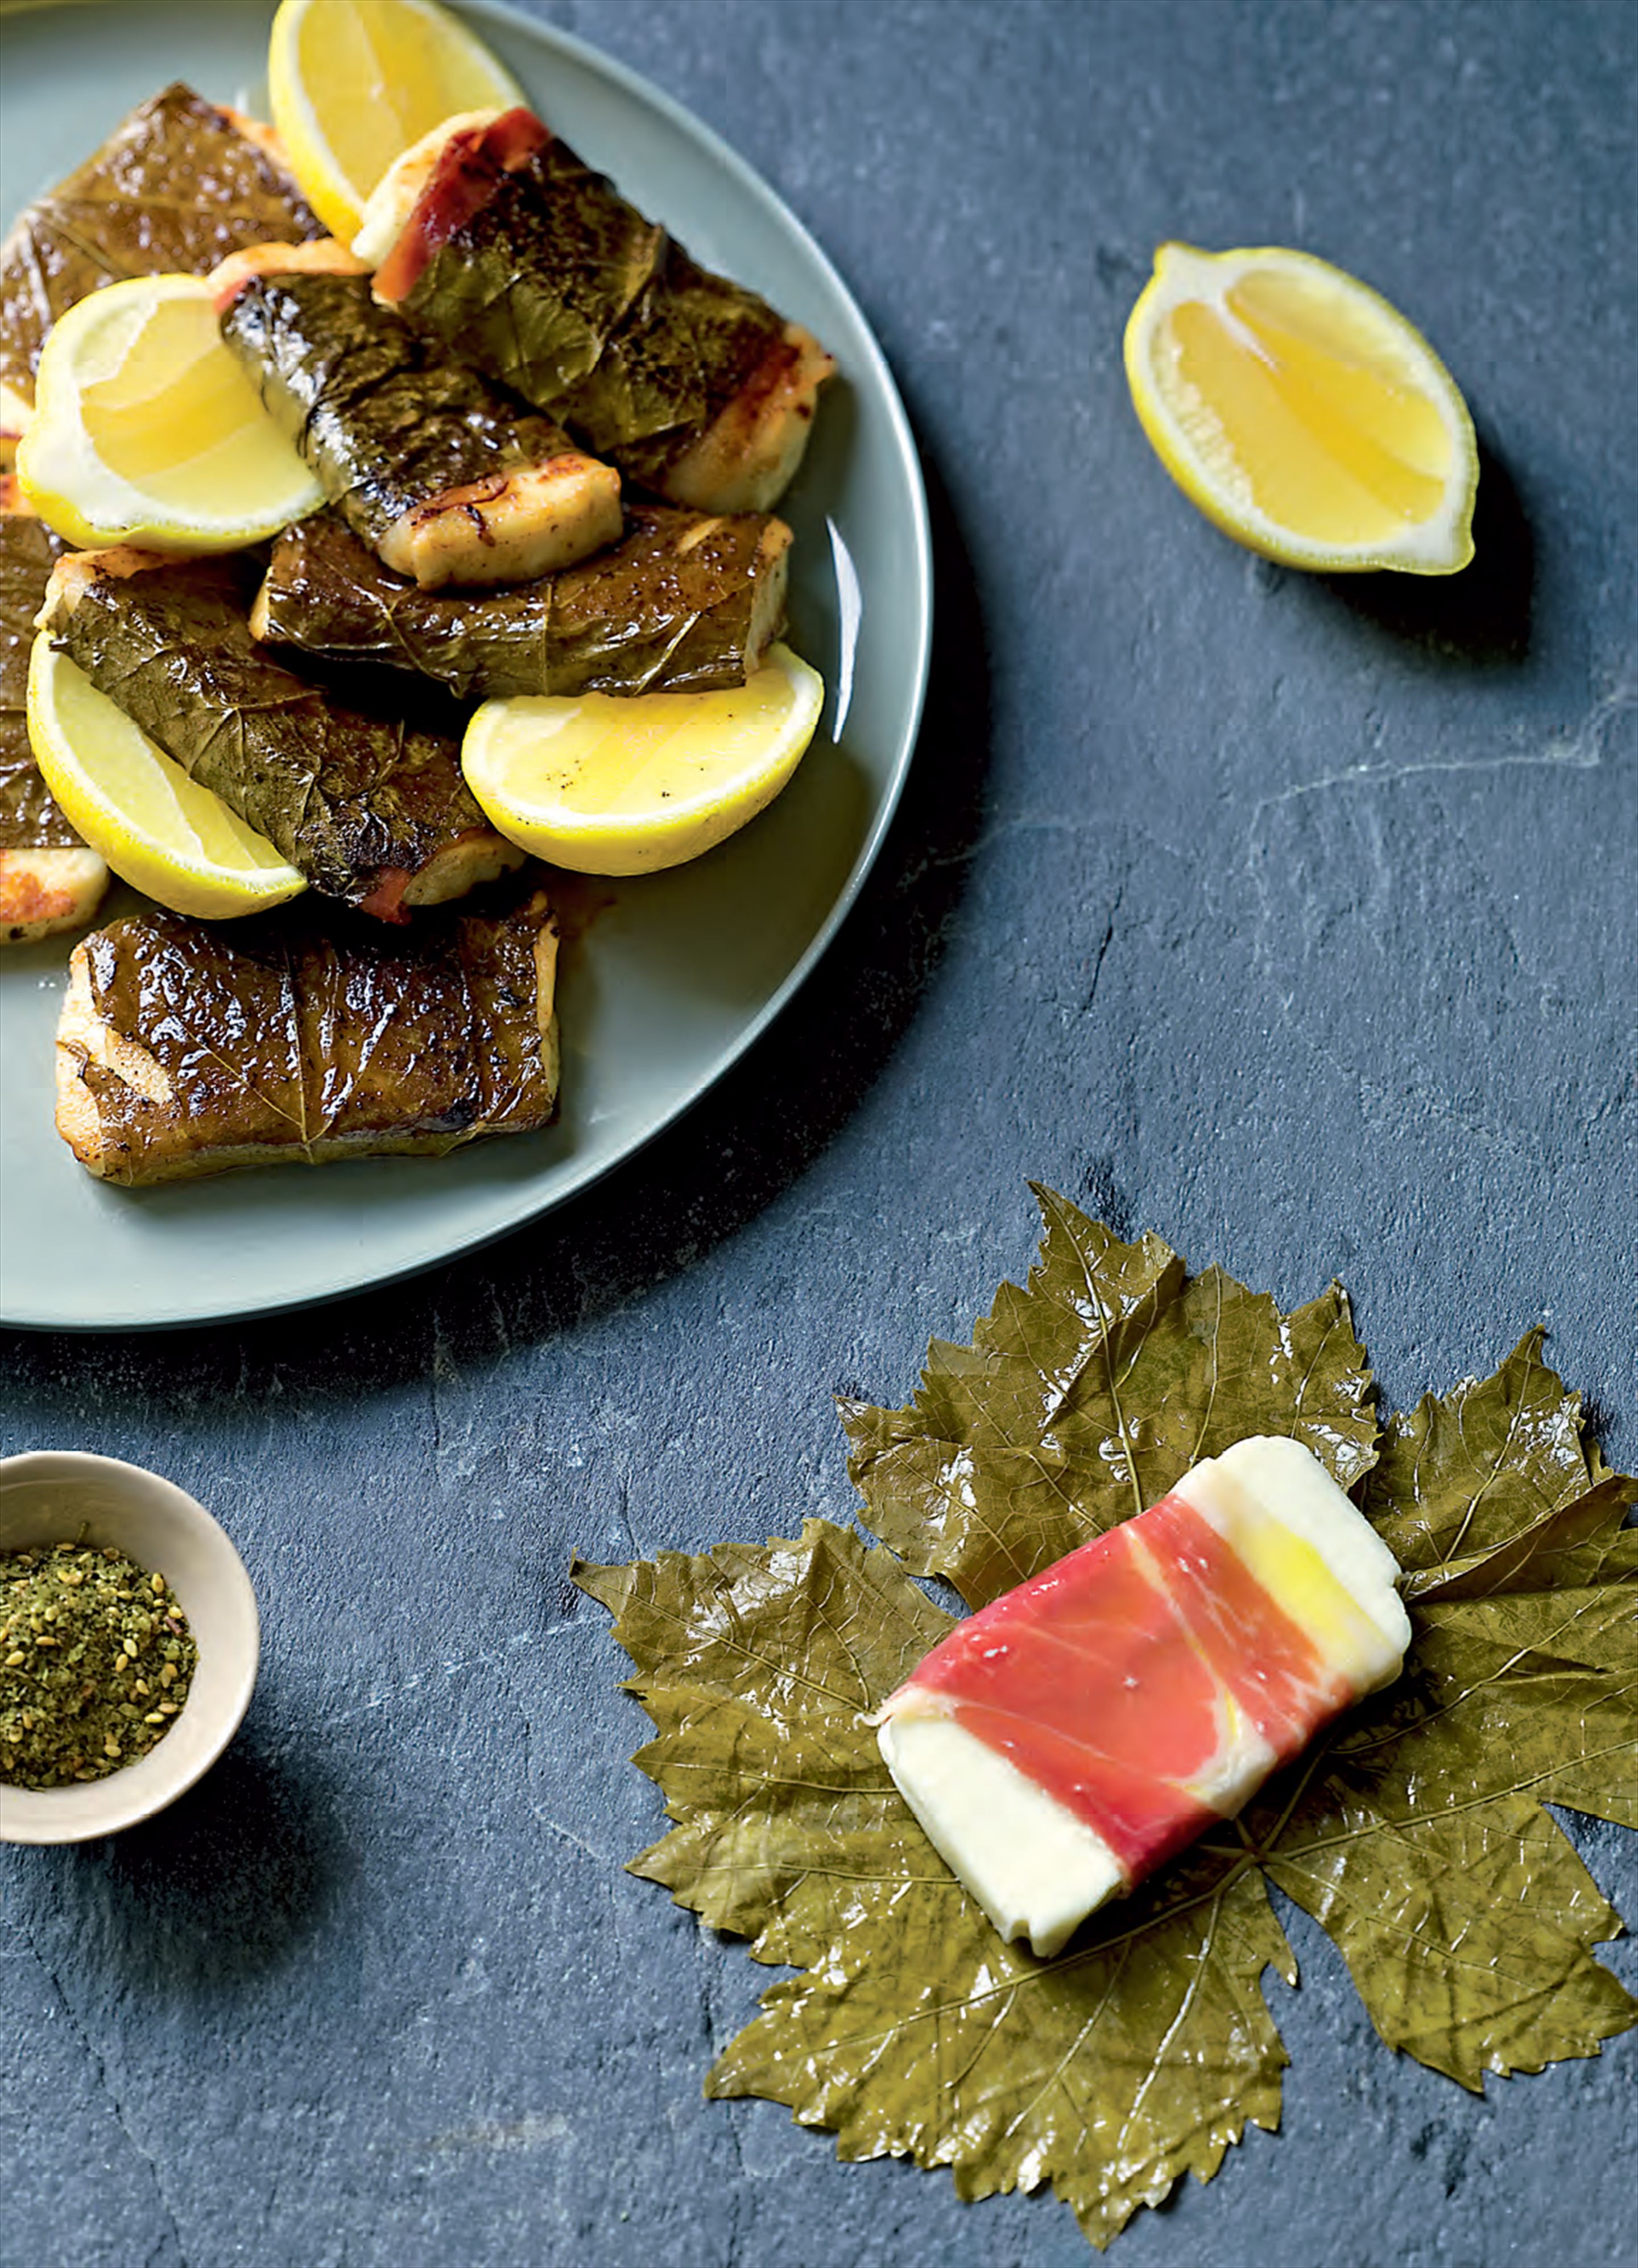 Haloumi grilled in vine leaves